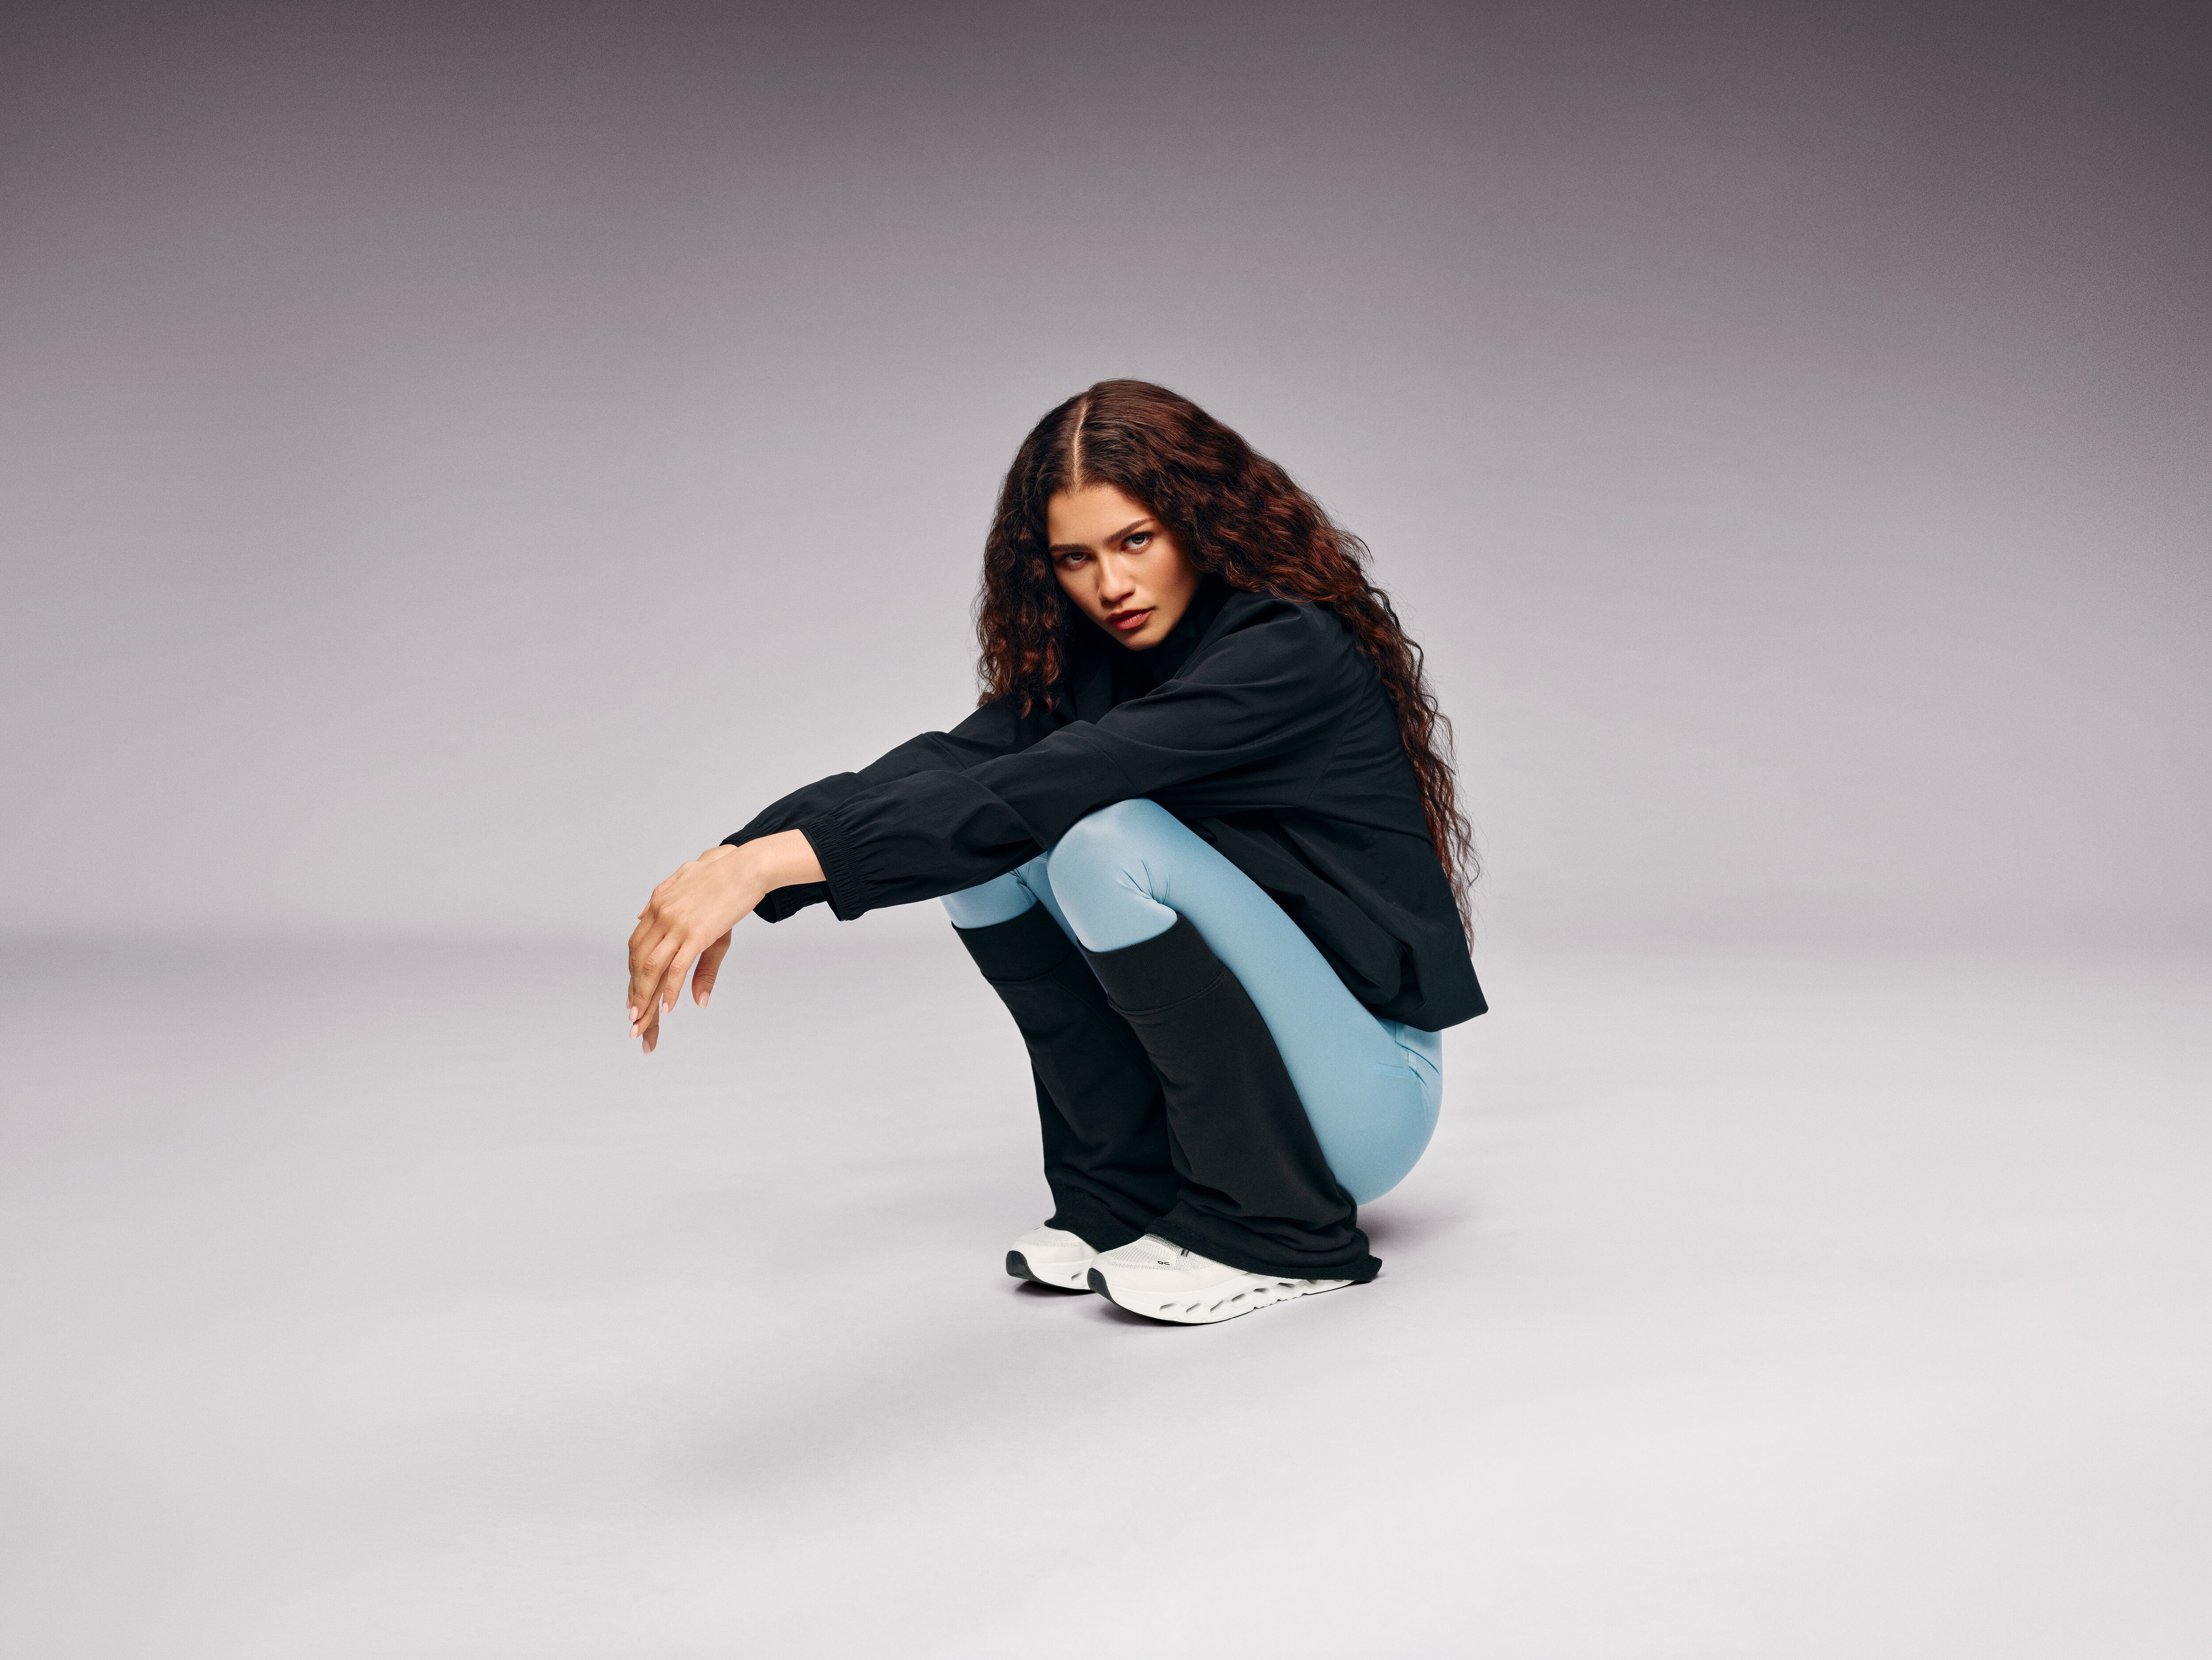 Zendaya poses in stylish activewear, pairing a black top with light blue leggings and white sneakers, set against a minimalist backdrop